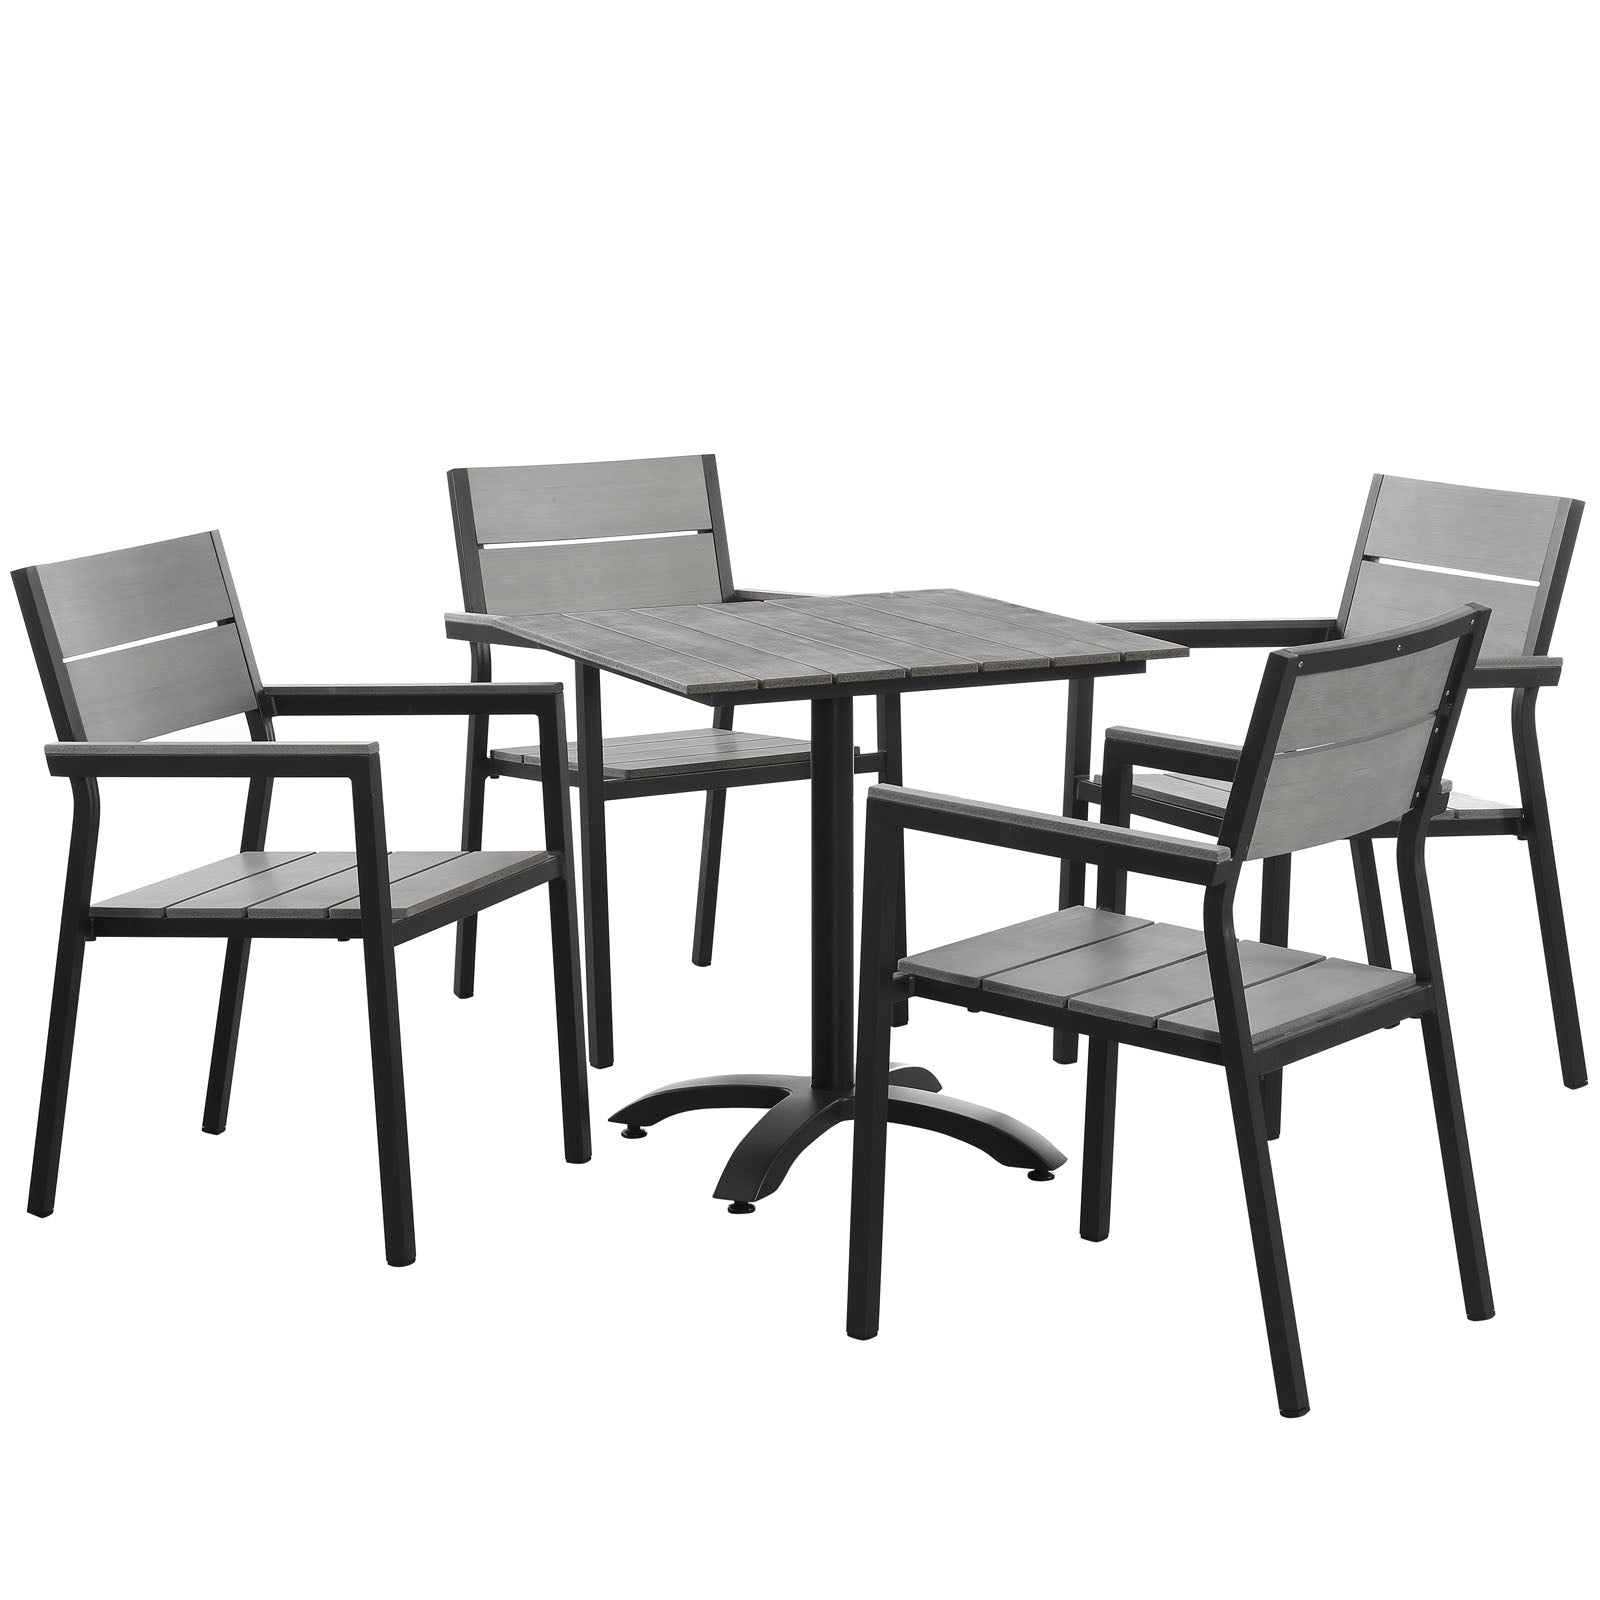 Maine 5 Piece Outdoor Patio Dining Set - East Shore Modern Home Furnishings